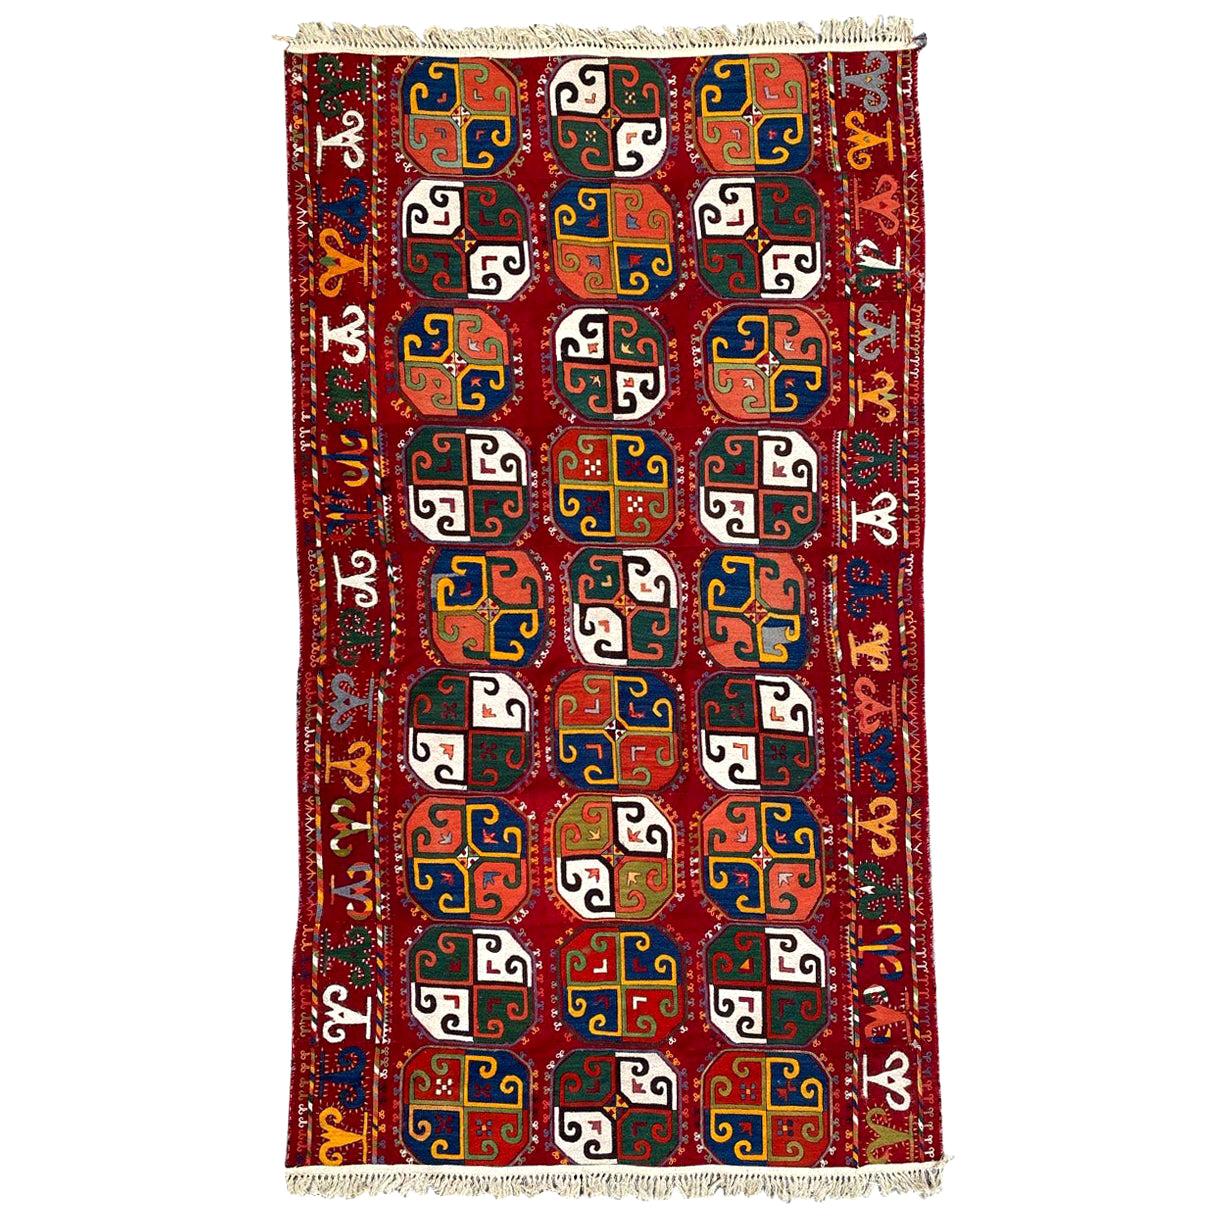 Bobyrug’s Wonderful Antique Uzbek Woven and Embroidered Panel For Sale